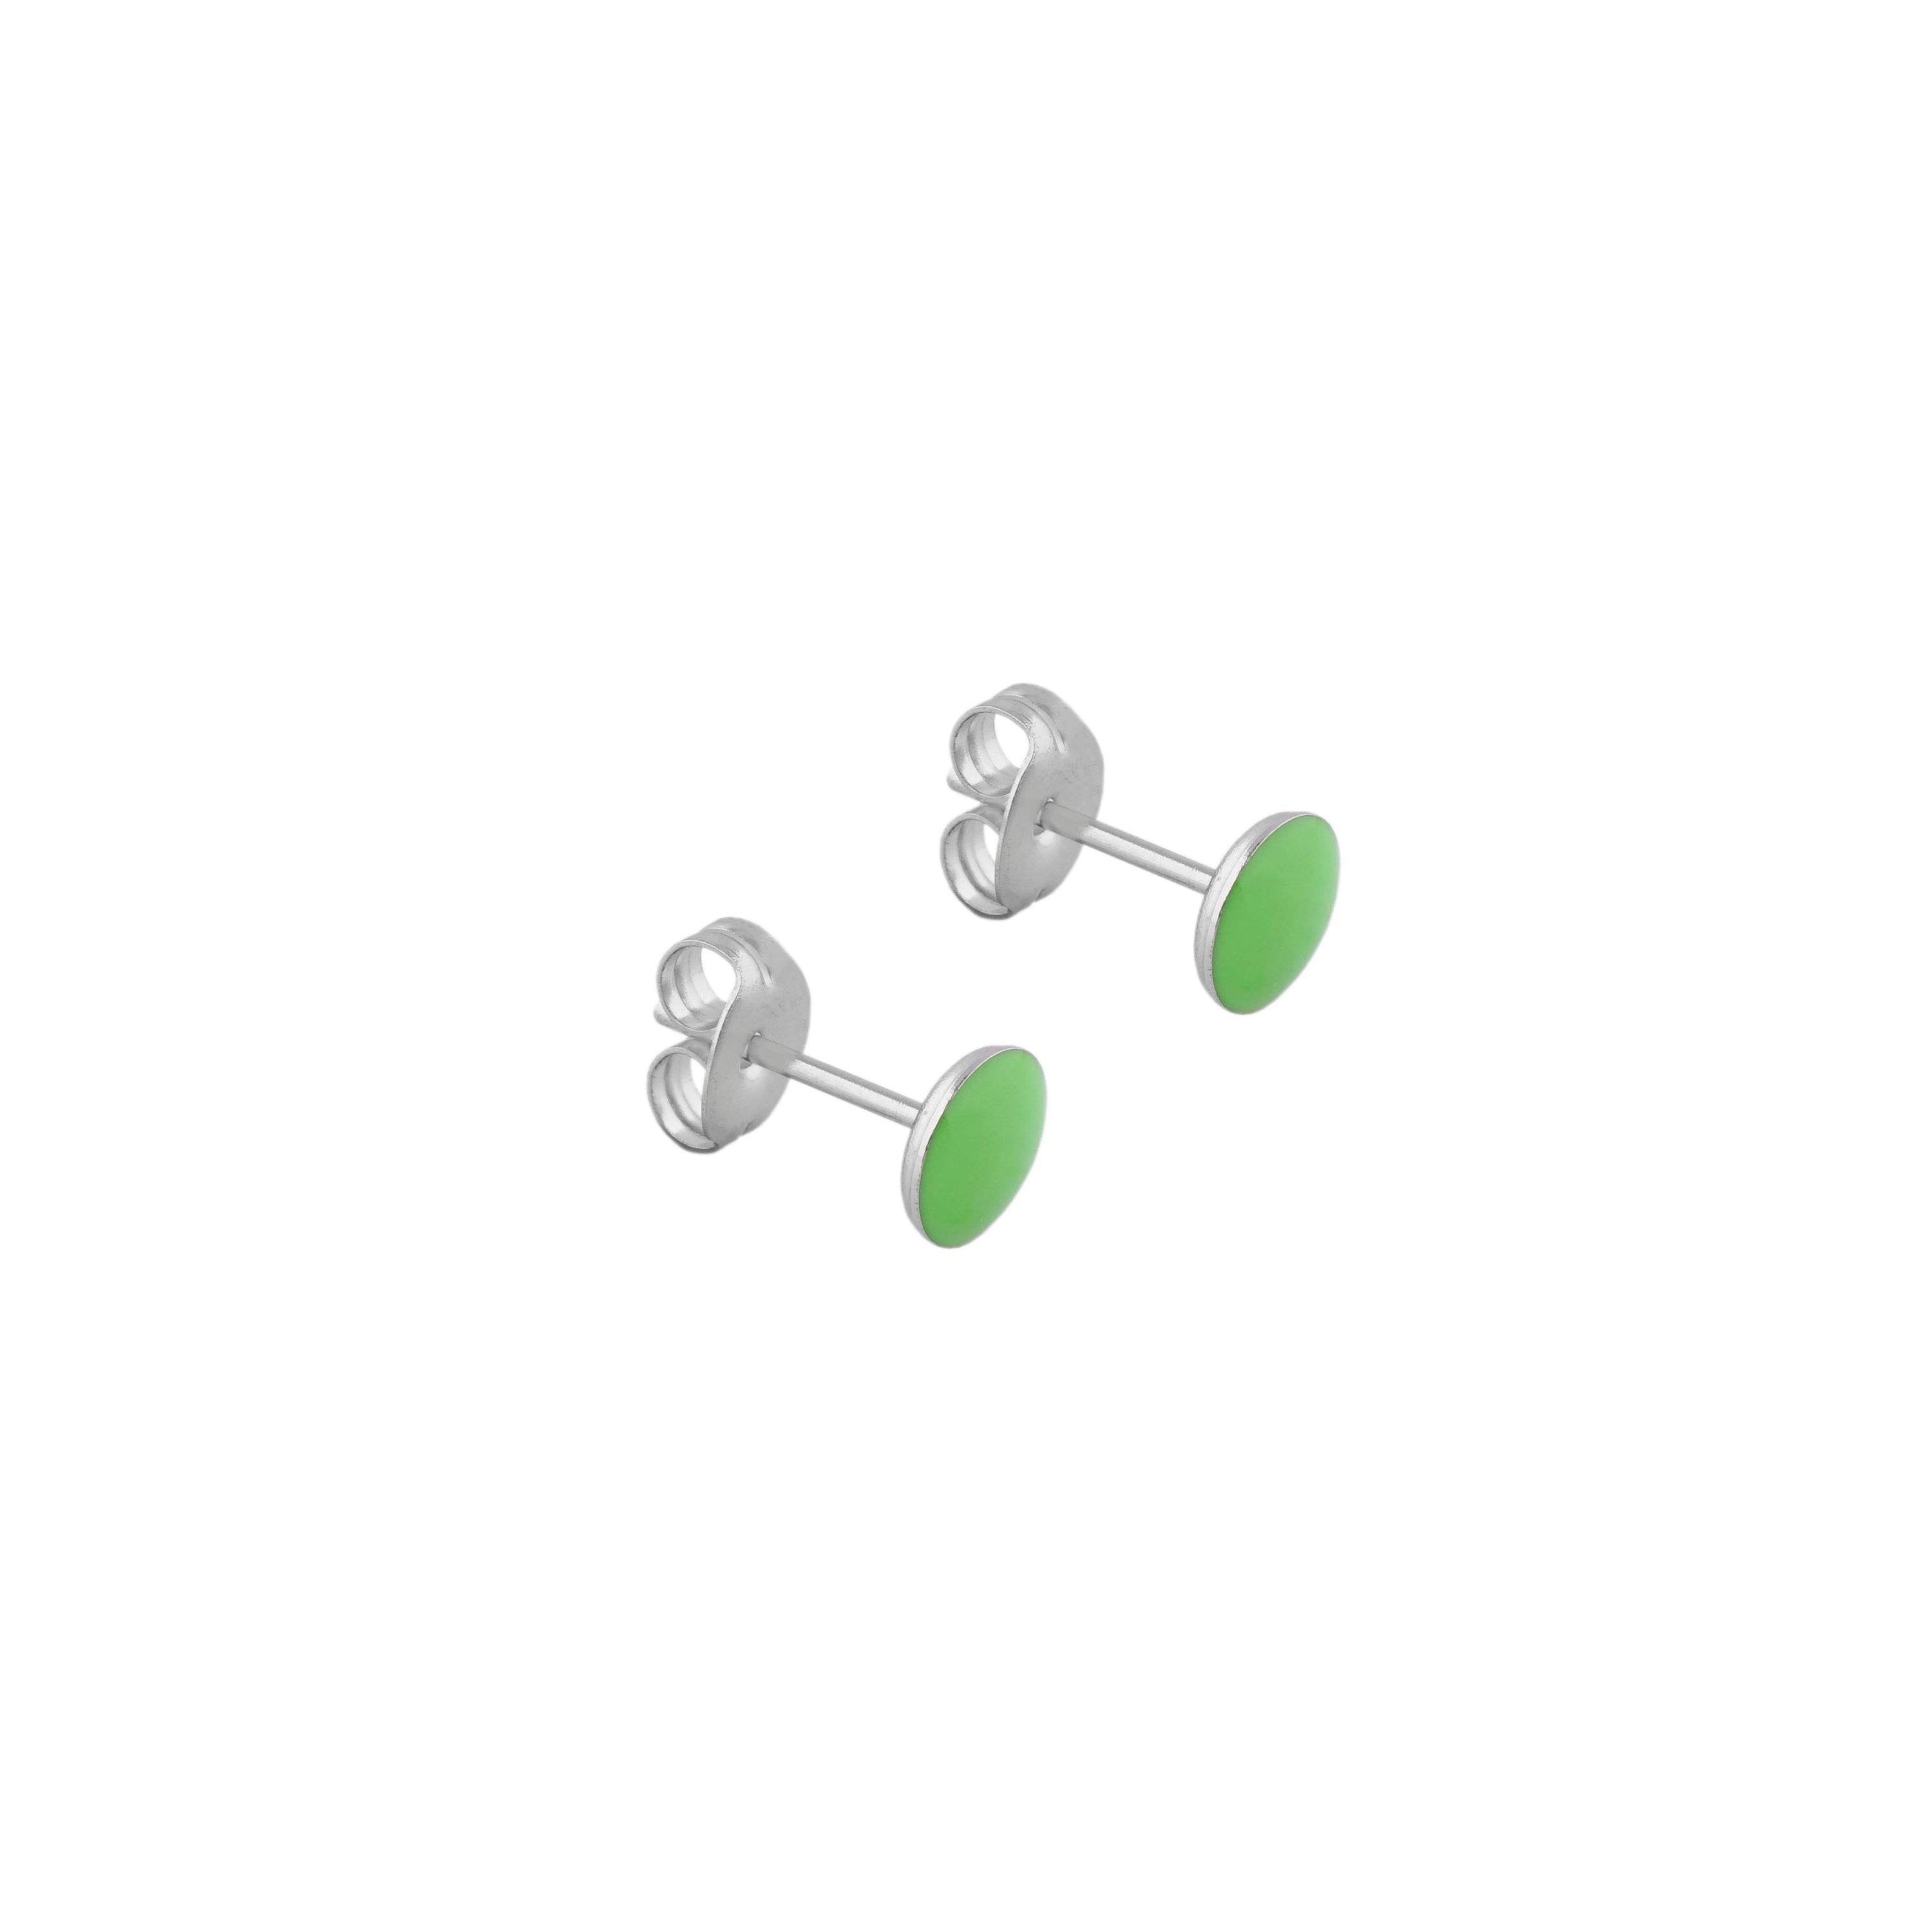 Novelty Neon Green Button Allergy free Stainless Steel Ear Studs For Kids